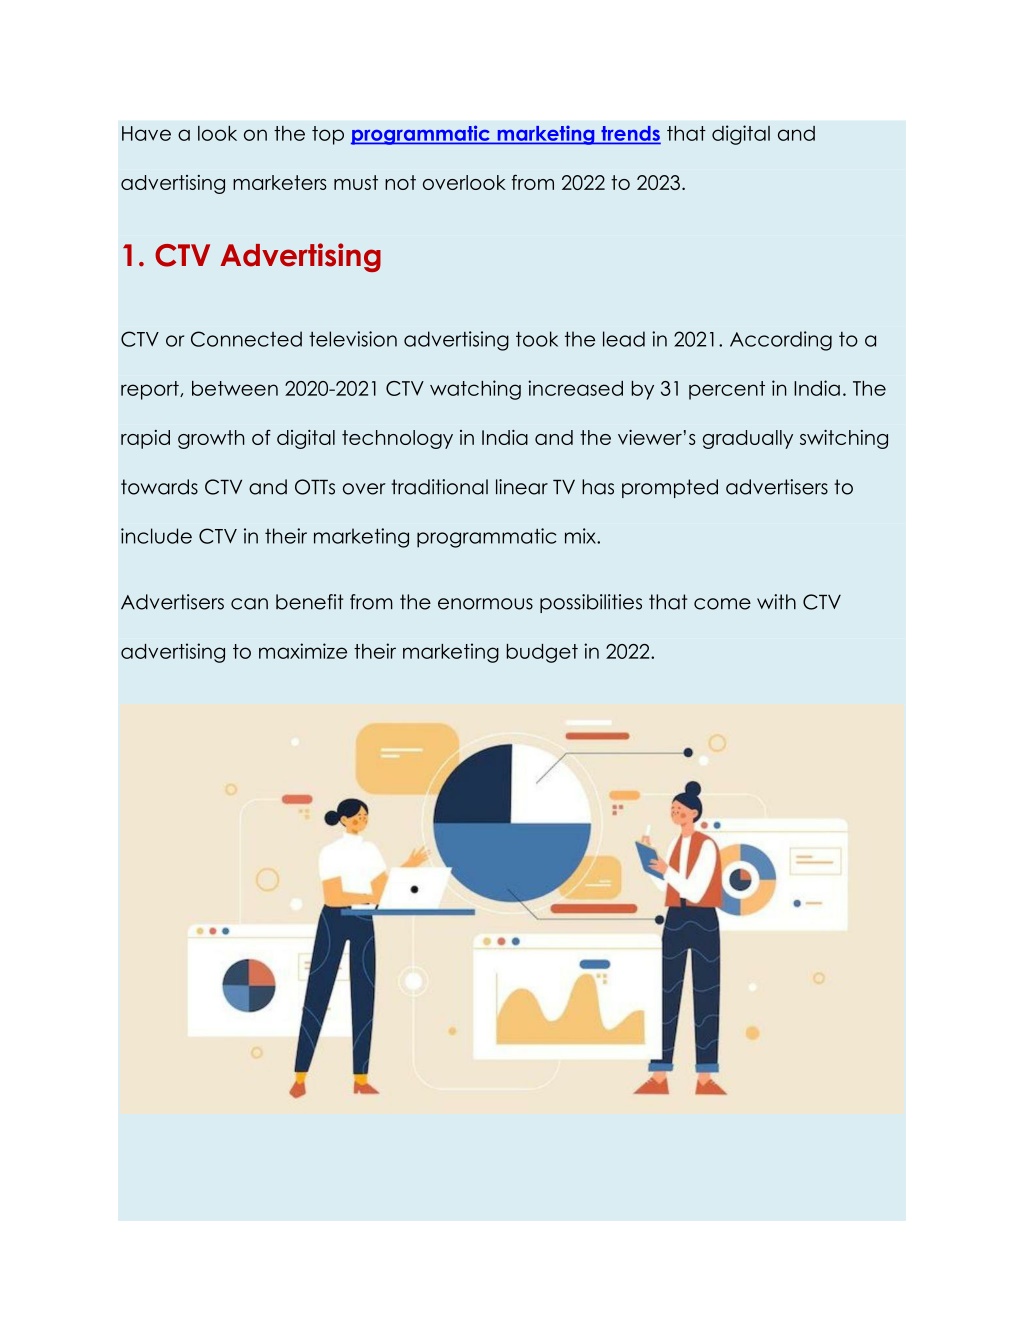 Ppt Latest Trends Of Programmatic Advertising In 2022 Voiro Technologies Powerpoint 2346